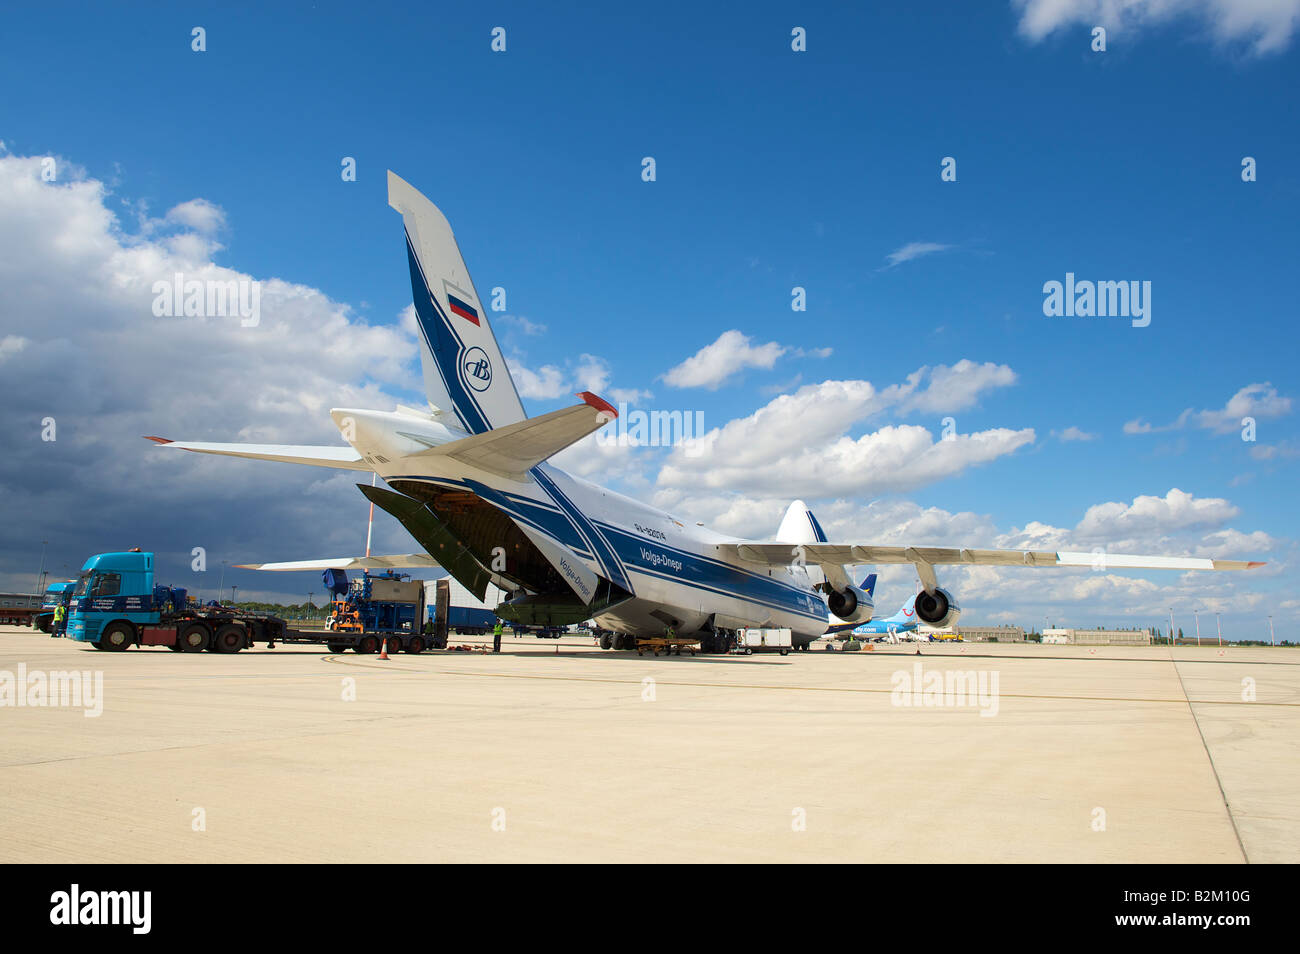 A giant Antanov 124, one of the largest cargo planes in the world, awaits cargo at Robin Hood Airport Doncaster Sheffield Stock Photo